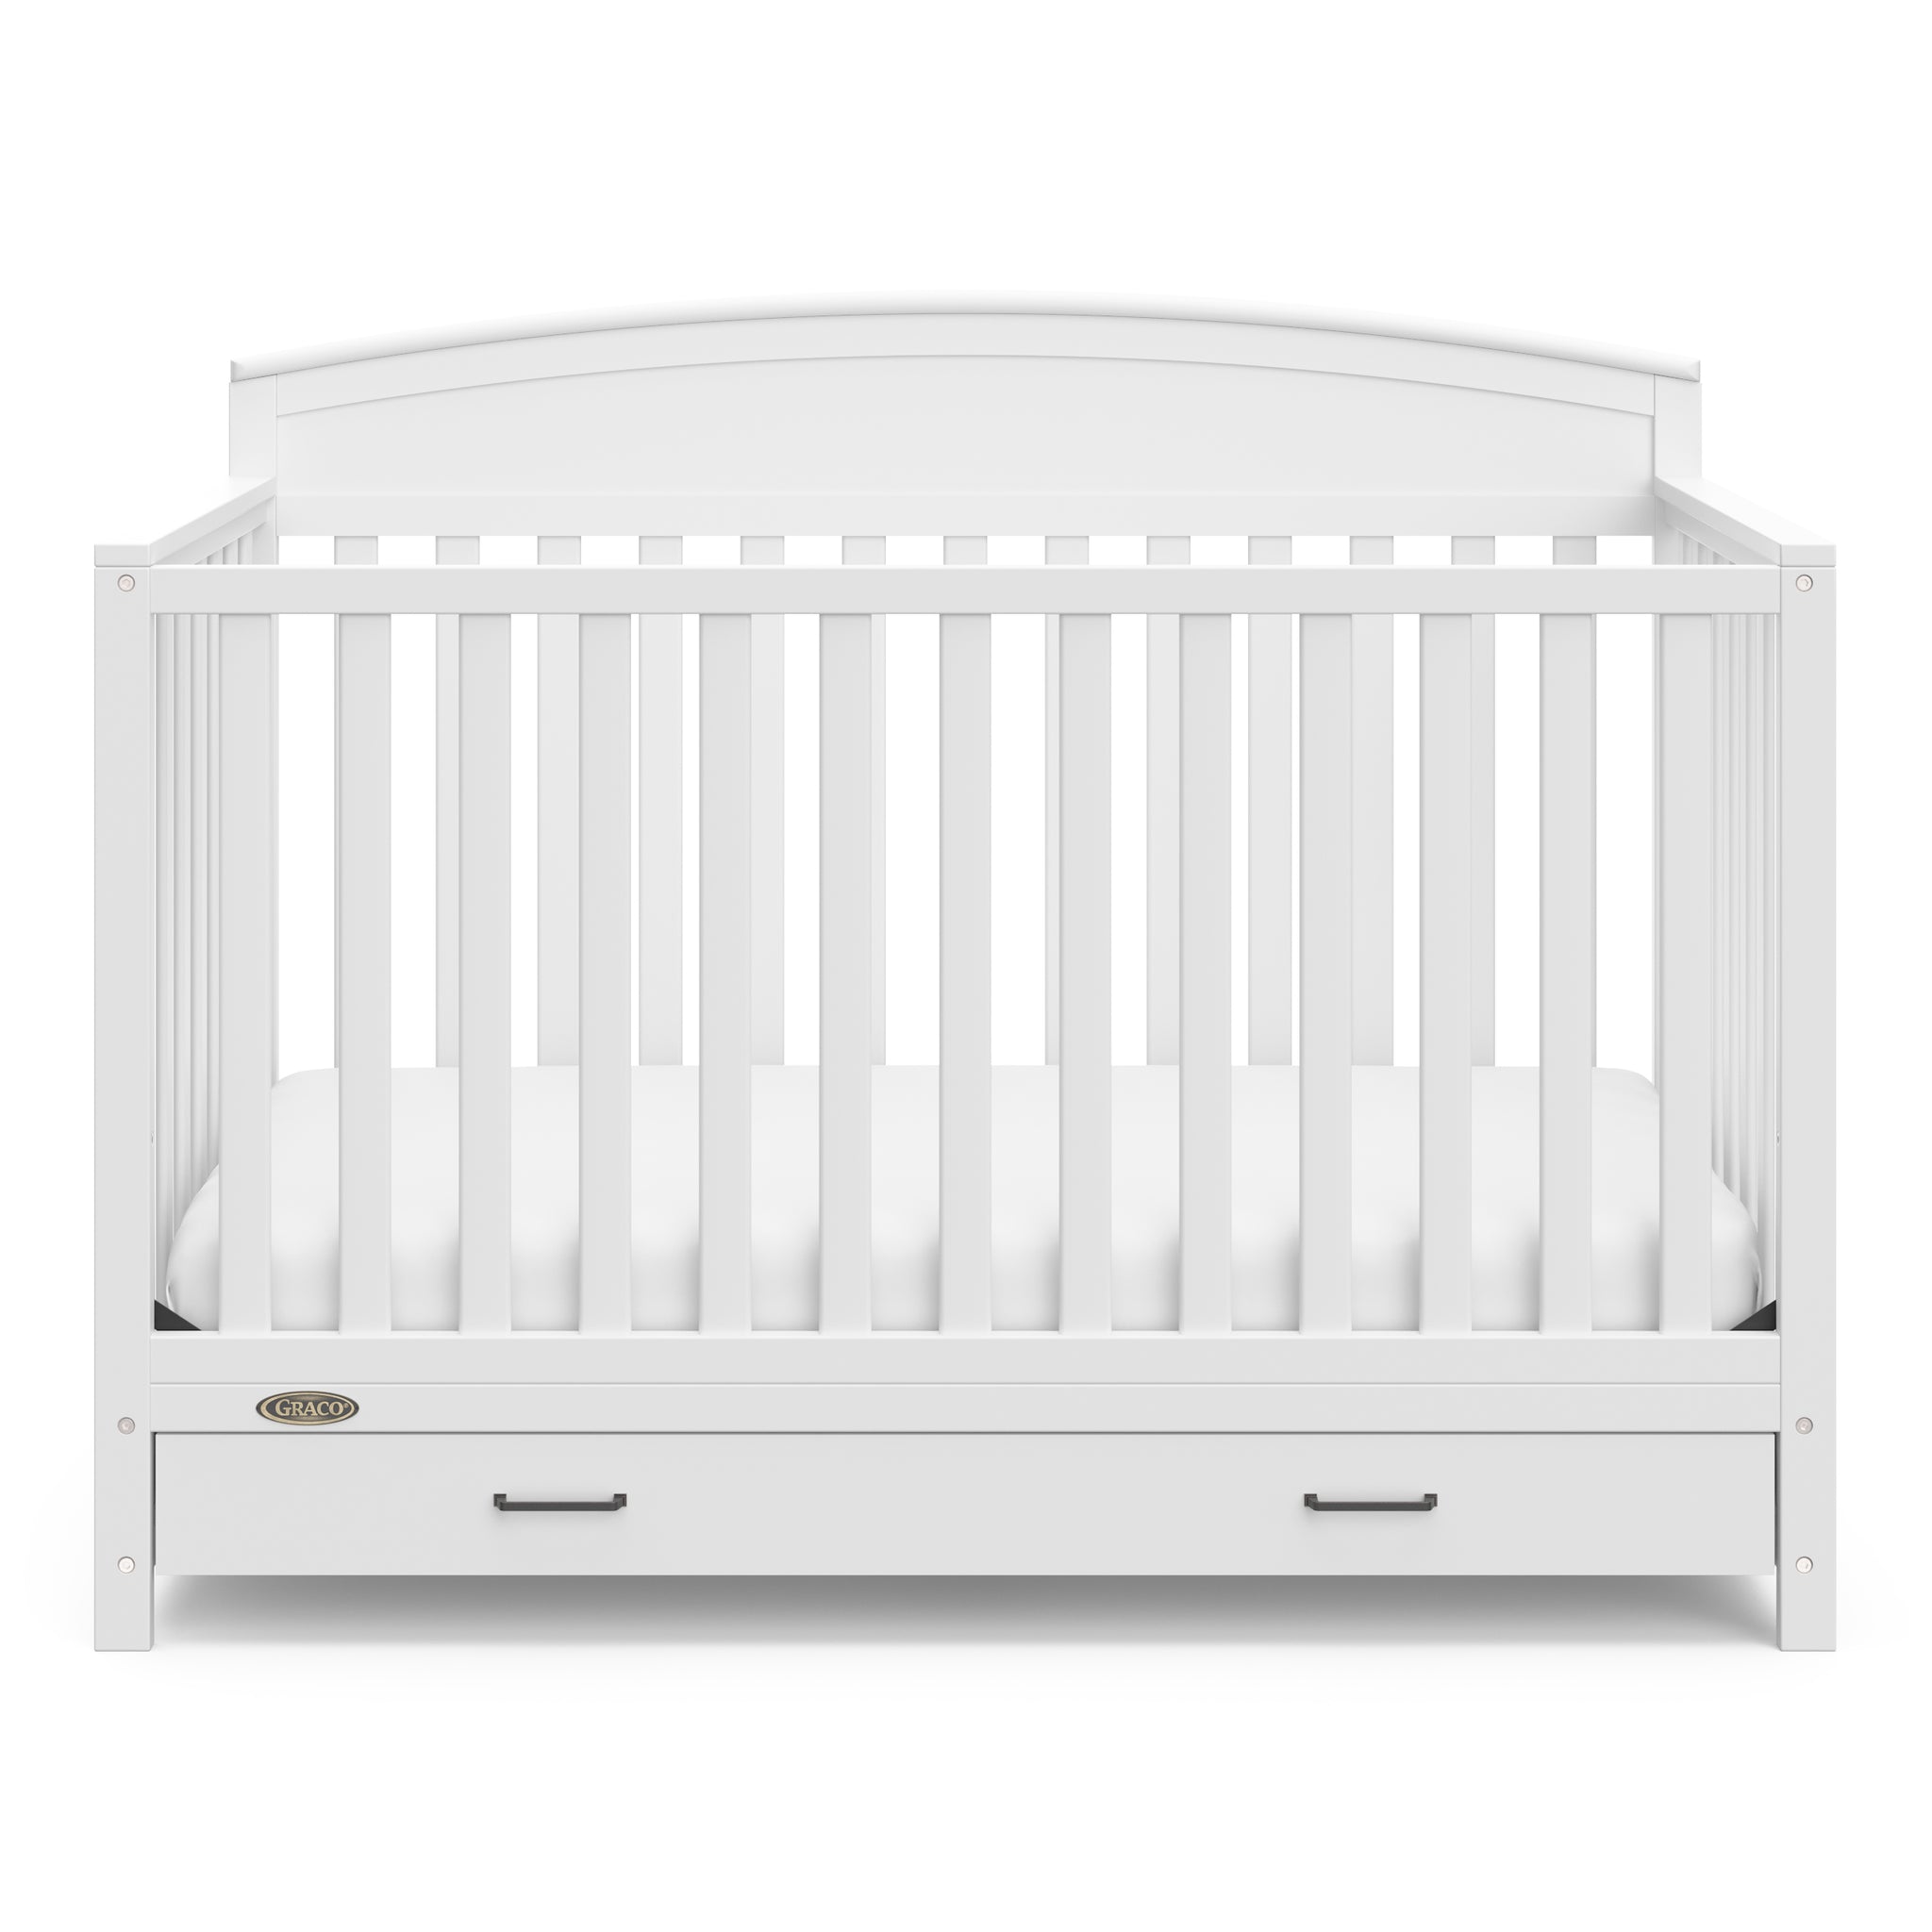 Front view of white crib with drawer